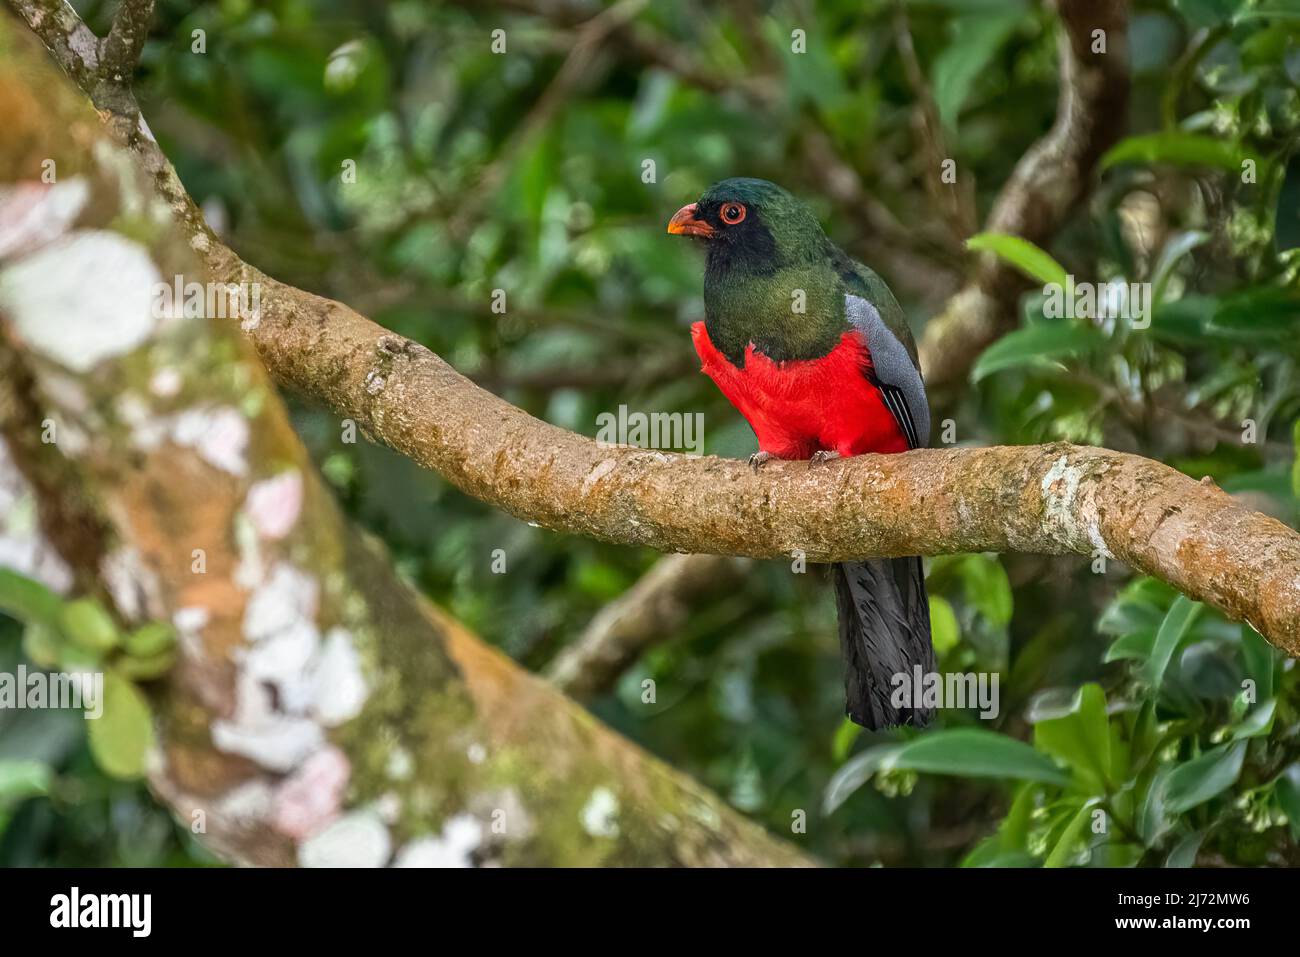 Slaty-tailed trogon male perched image taken in Panamas rain forest Stock Photo